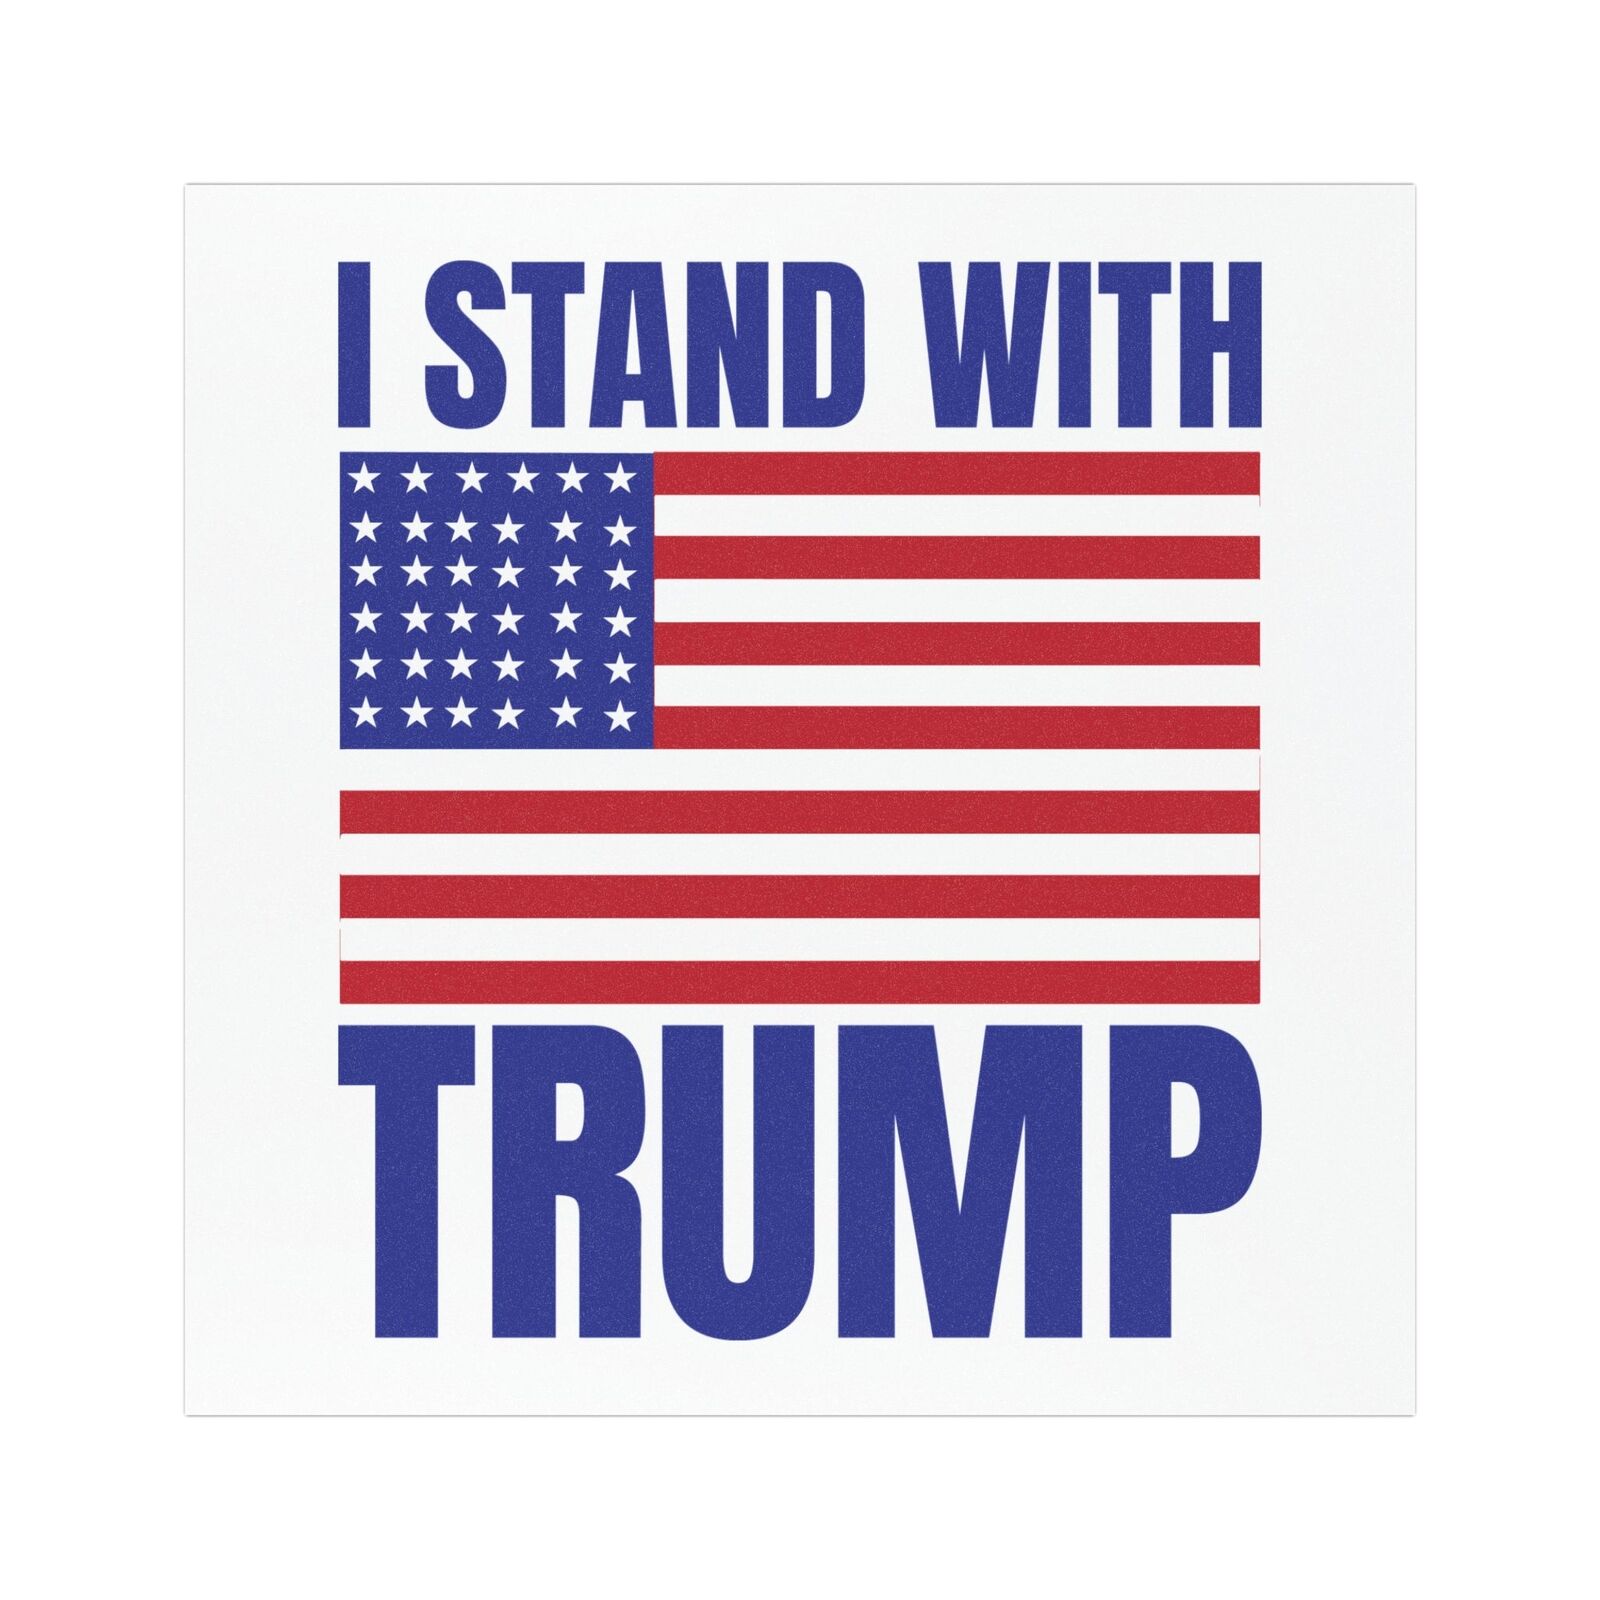 Car Magnet I Stand With Trump 5x5